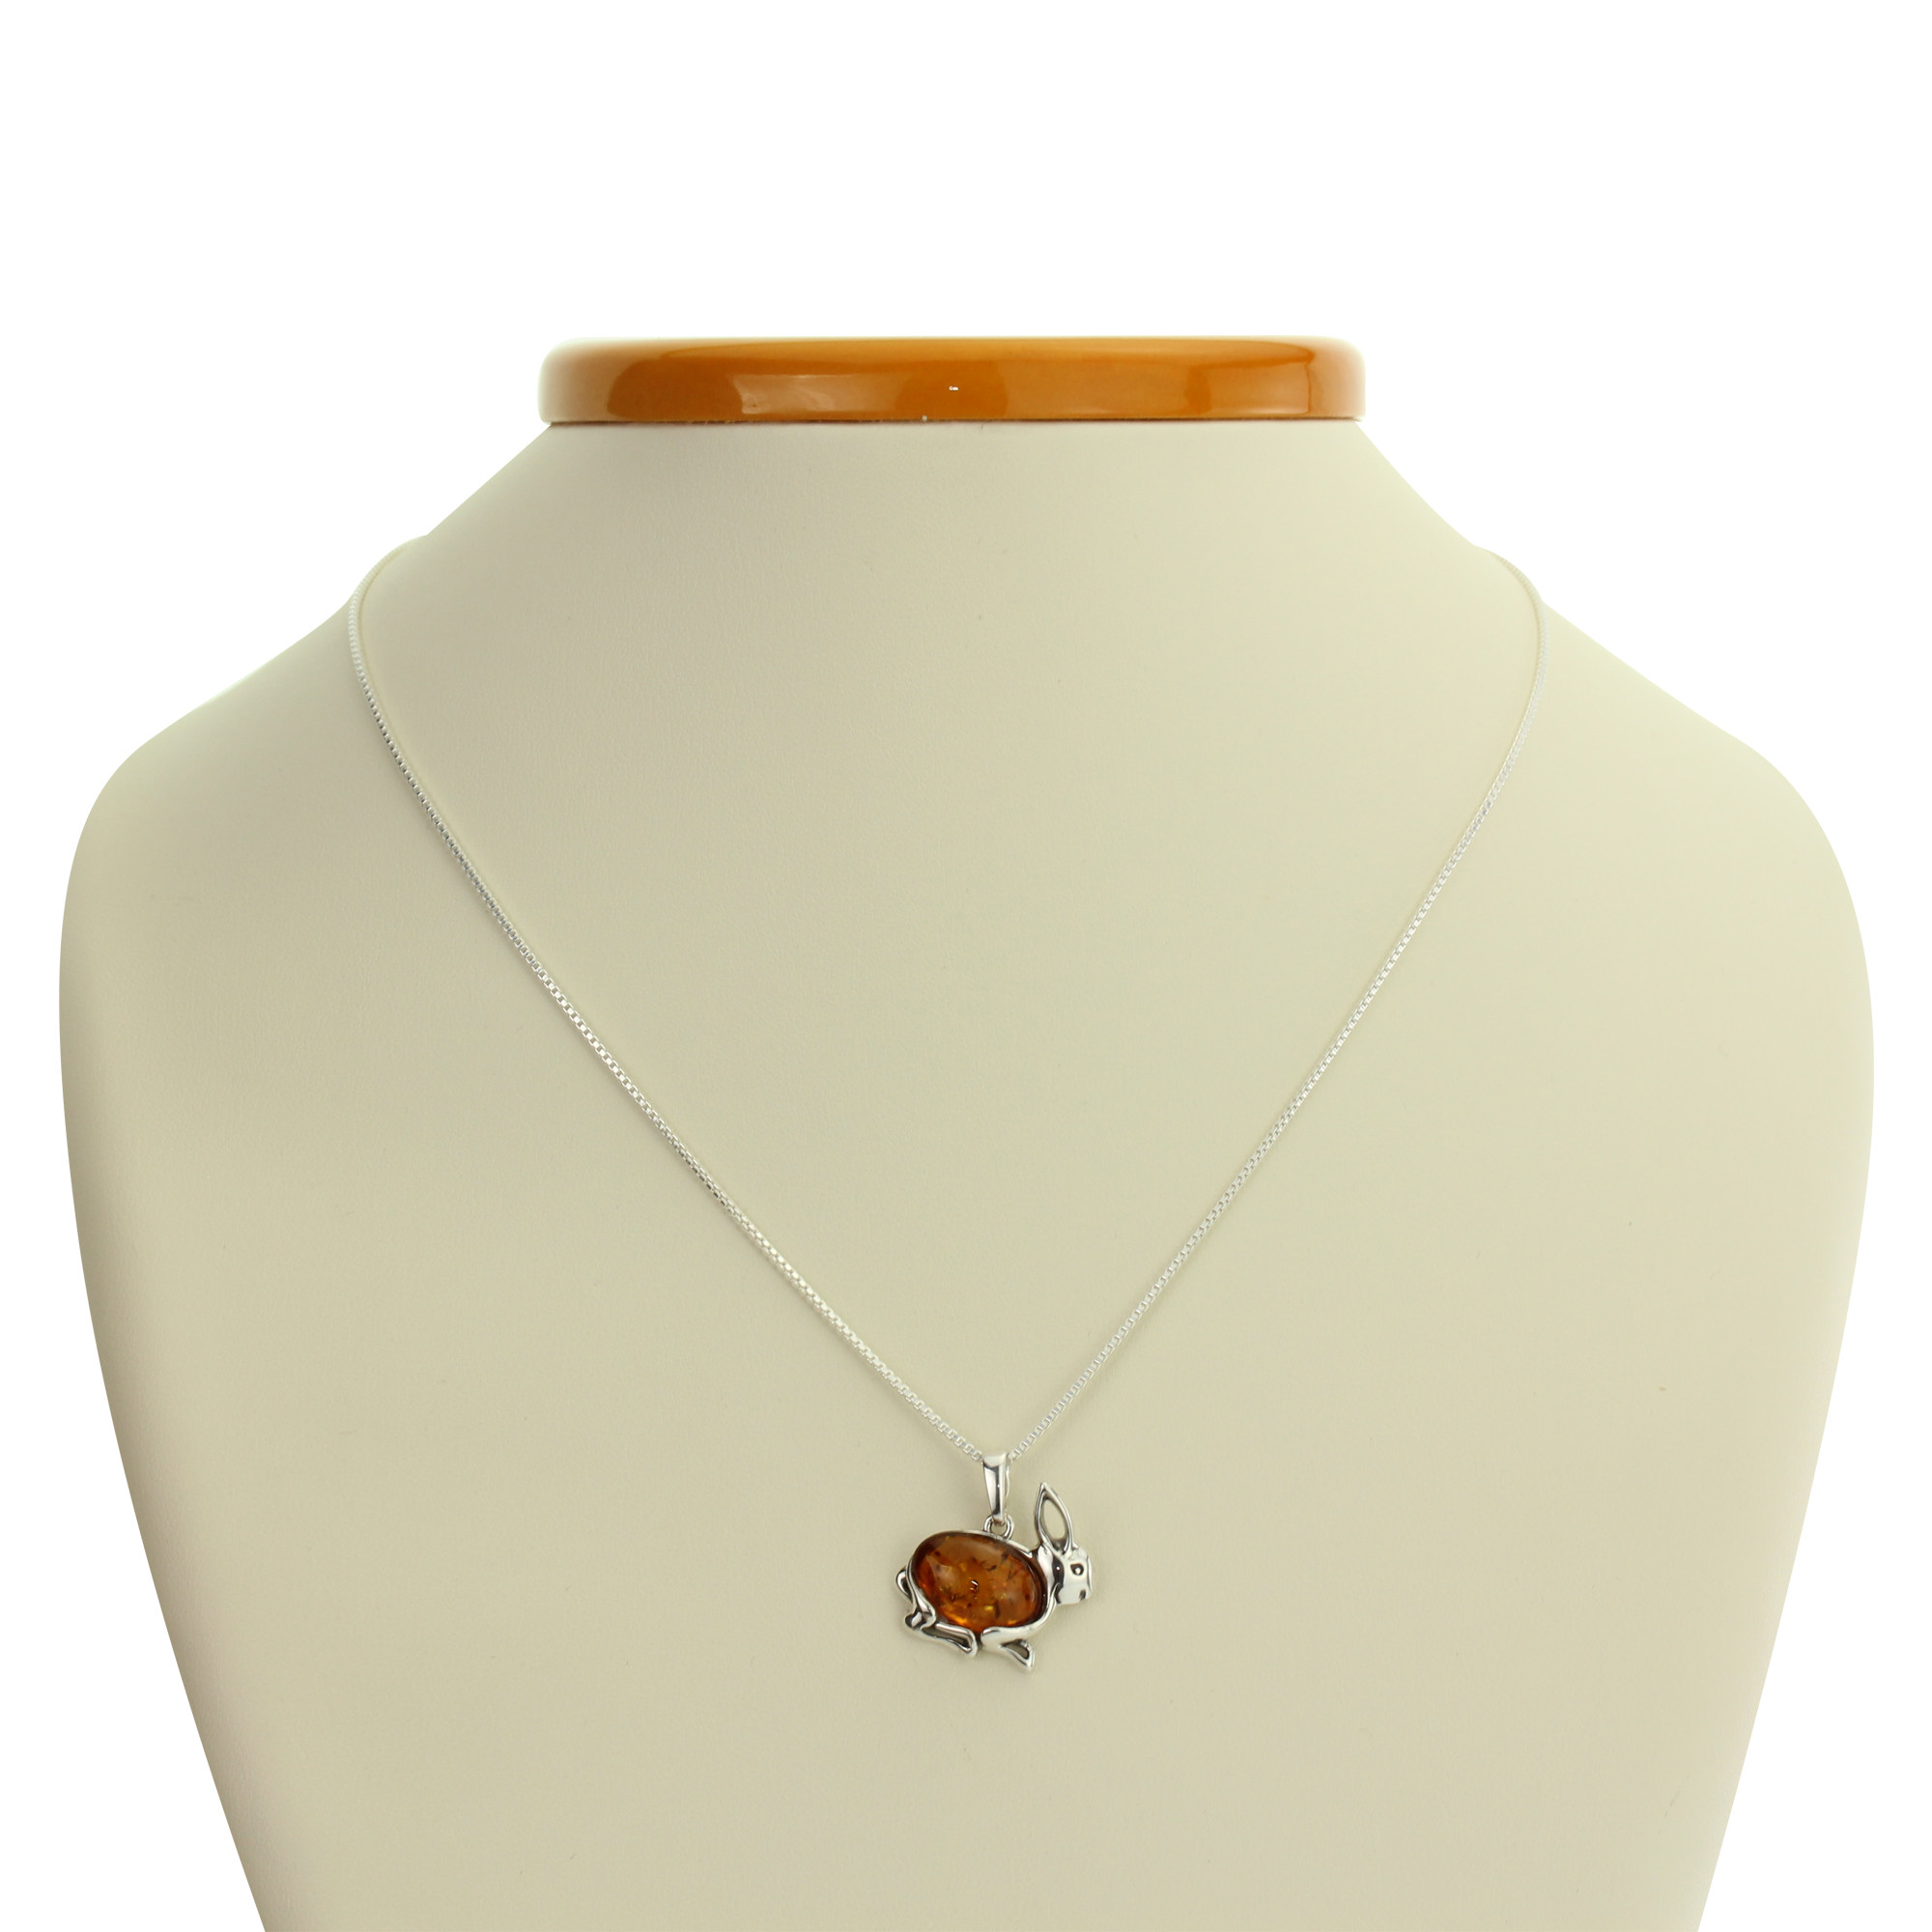 14 16 18 20 22 24 26 28 30 32 34 1mm ITALIAN SNAKE CHAIN BALTIC AMBER AND STERLING SILVER 925 RABBIT PENDANT NECKLACE